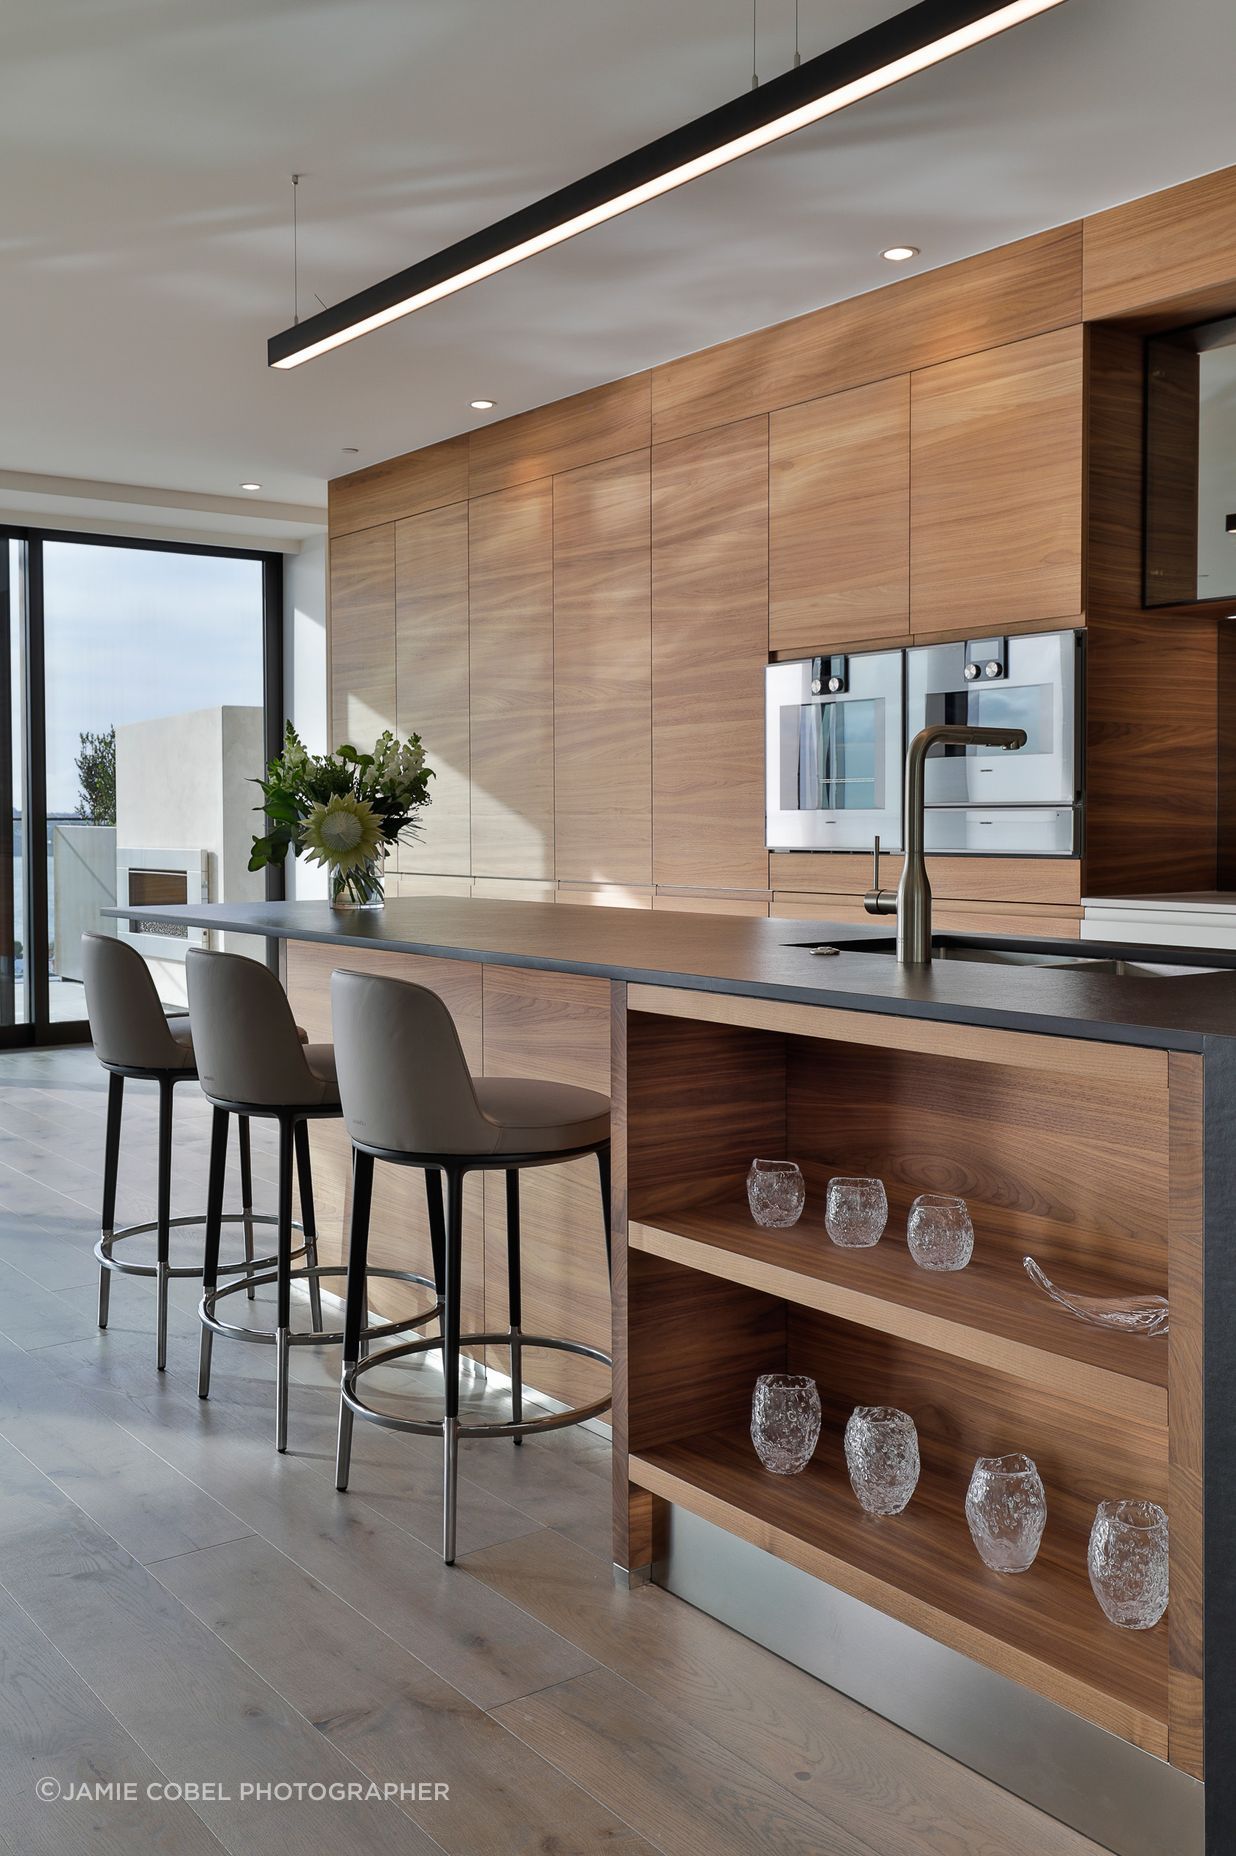 Arclinea, Convivium, featuring the elegant Canaletto American Walnut Tall and Wall units.